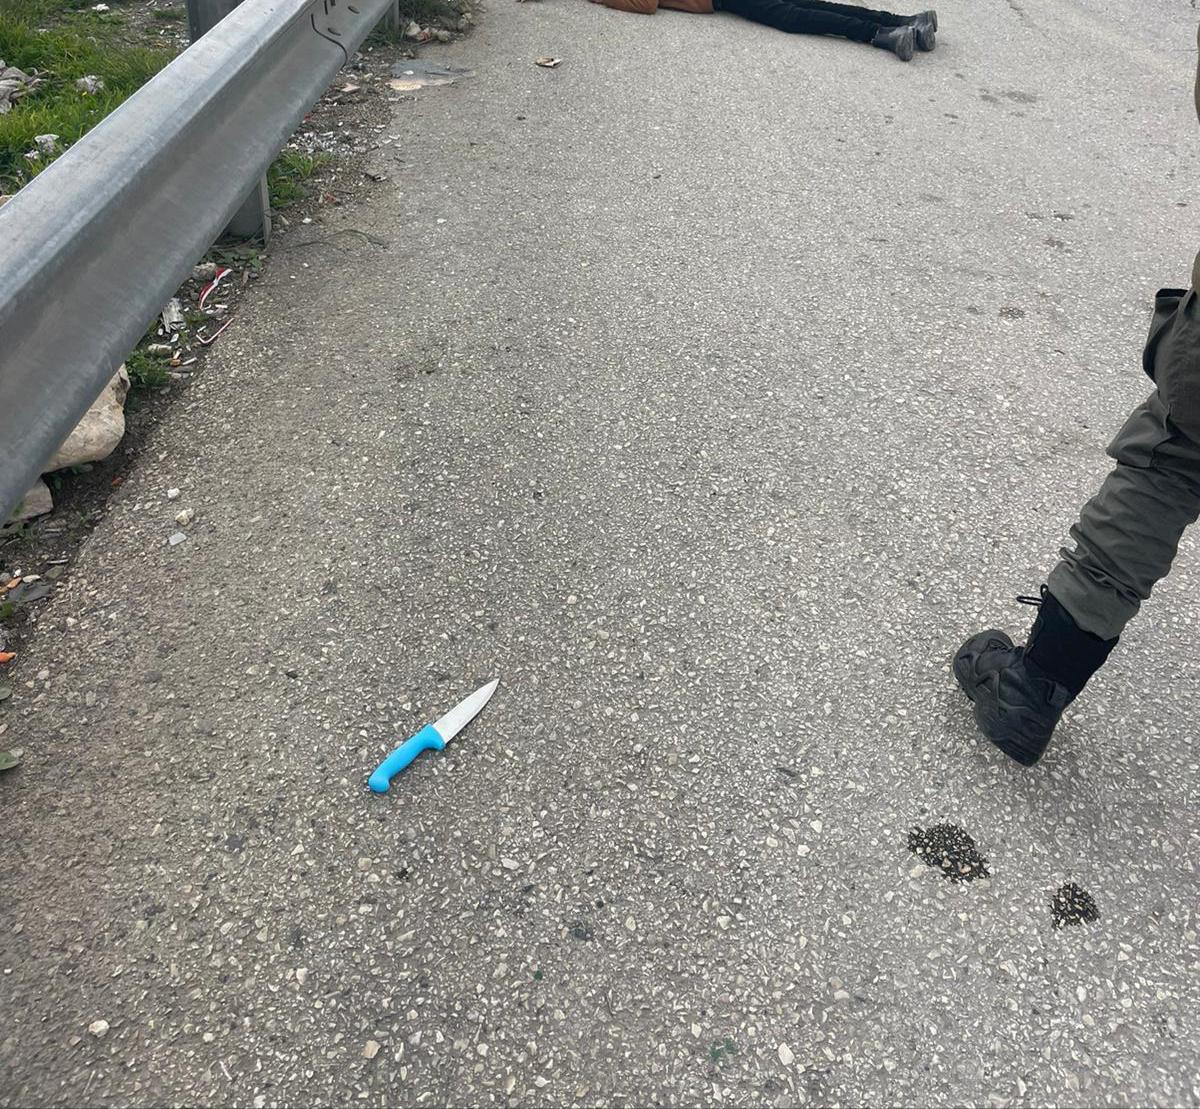 Border Police officers shot dead a Palestinian who attempted to stab them in the West Bank town of al-Eizariya, on the outskirts of East Jerusalem. Police say officers stopped the suspect, and during questioning he drew a knife and attempted to stab them. The Border Police officers returned fire, killing the suspect, police say. No officers are hurt in the incident